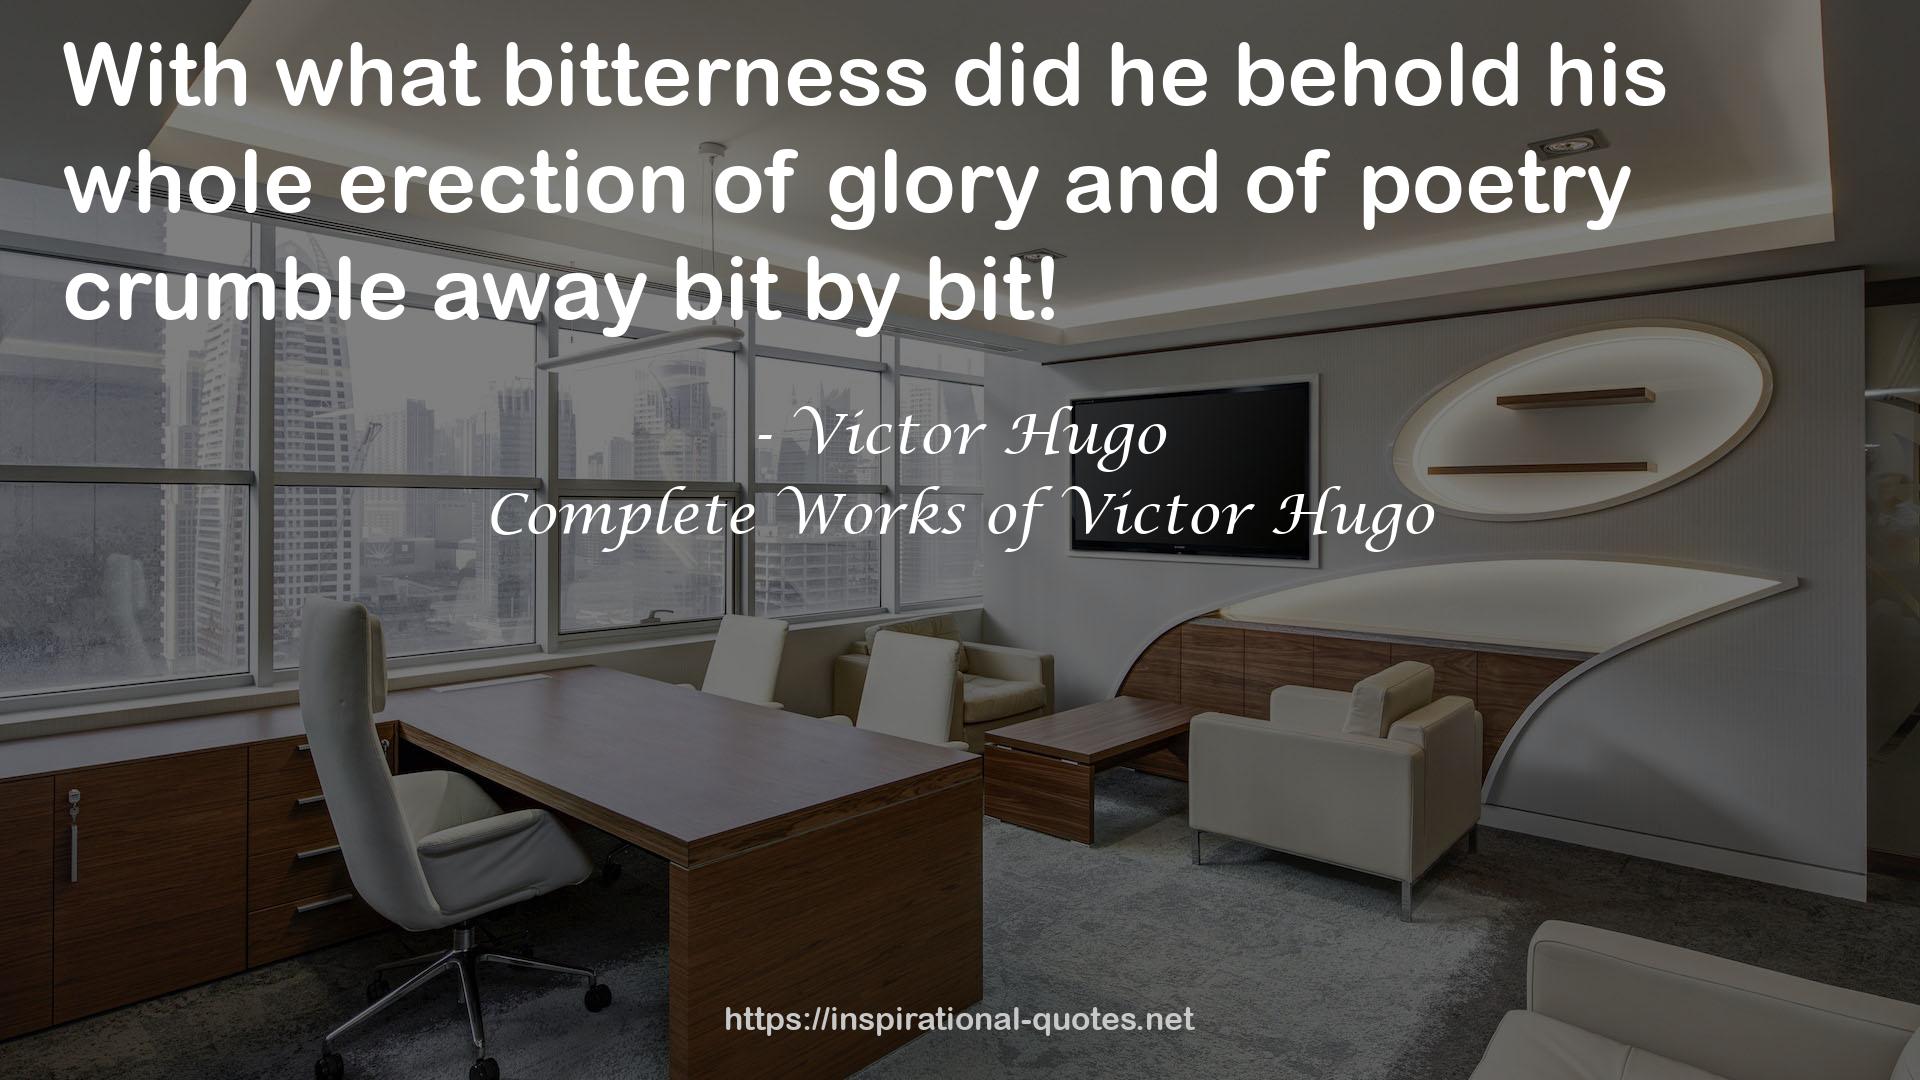 Complete Works of Victor Hugo QUOTES